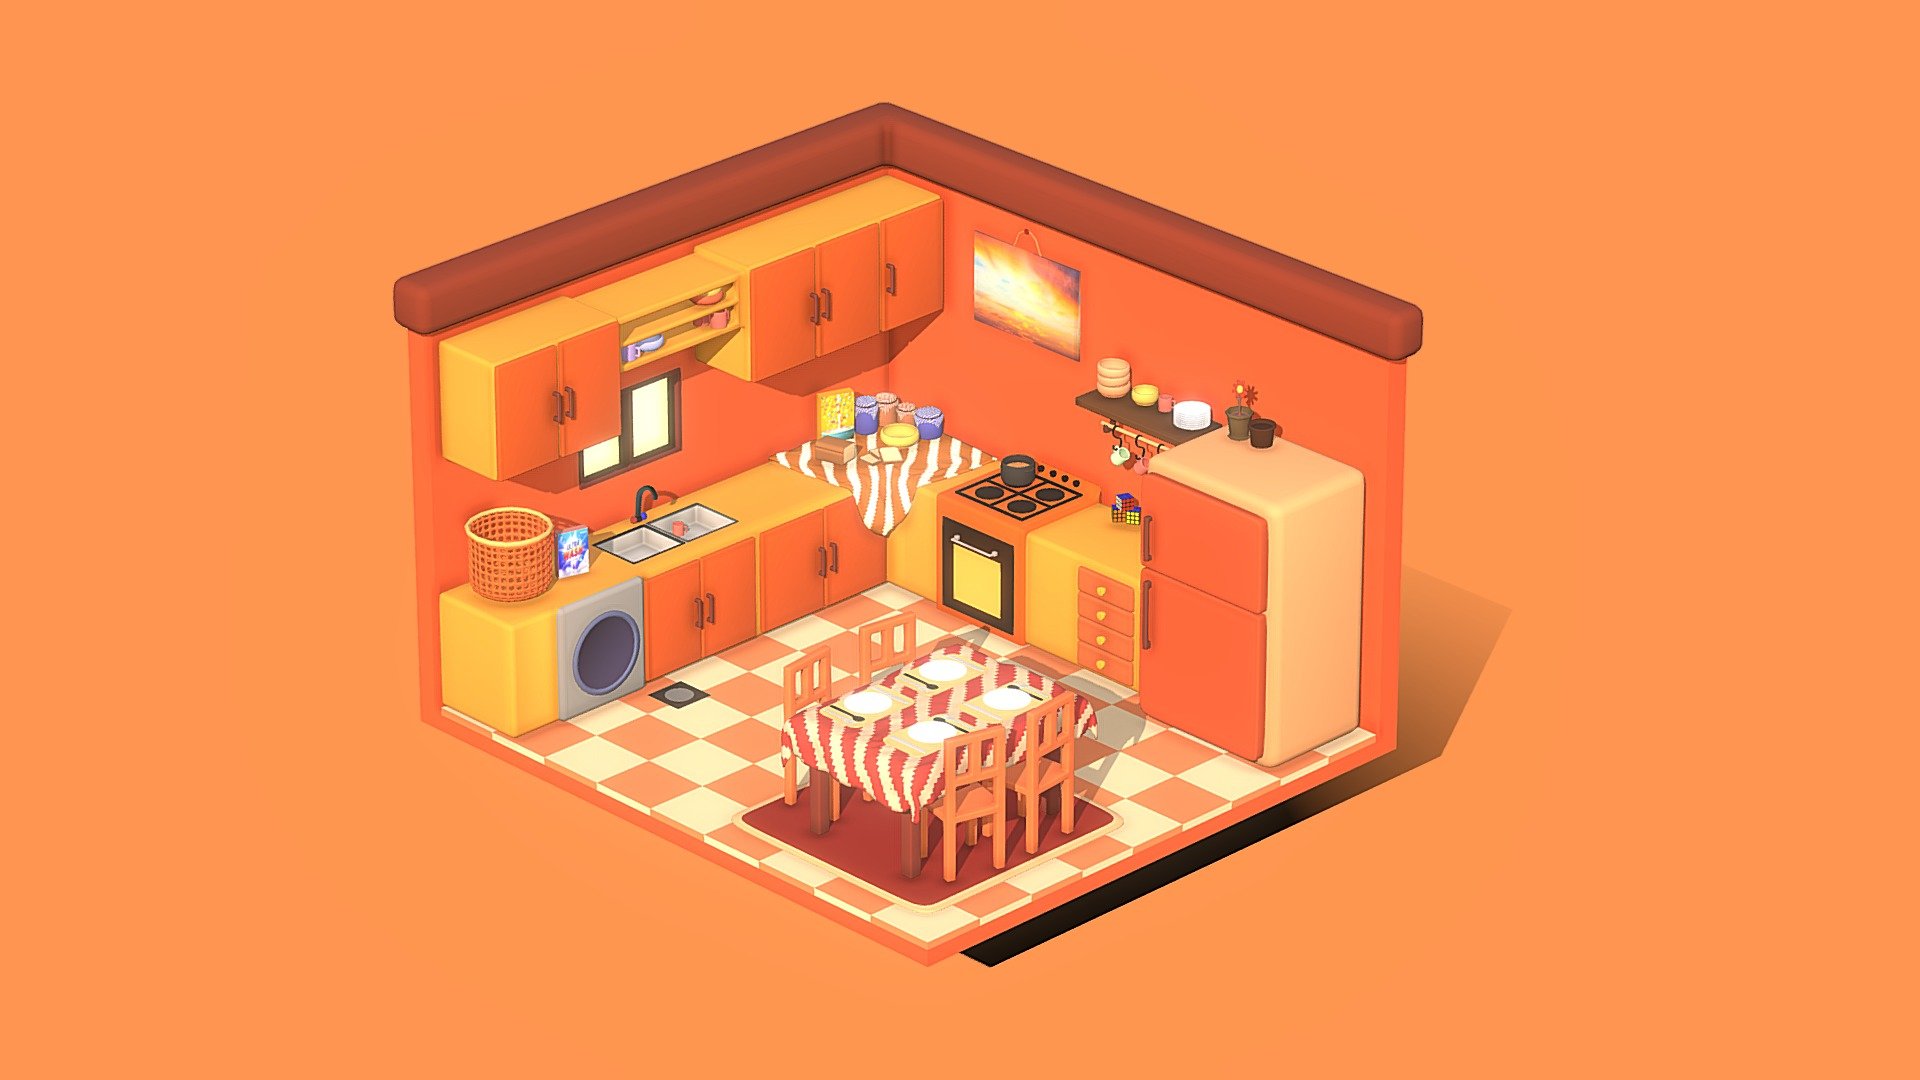 A cozy warm Isometric kitchen made with blender 3d software..
kind of stylized style 

you can see the render in my instagram page : gam_des

use this as you like :) ! - Isometric Stylized Kitchen - Buy Royalty Free 3D model by GAM-DES 3d model